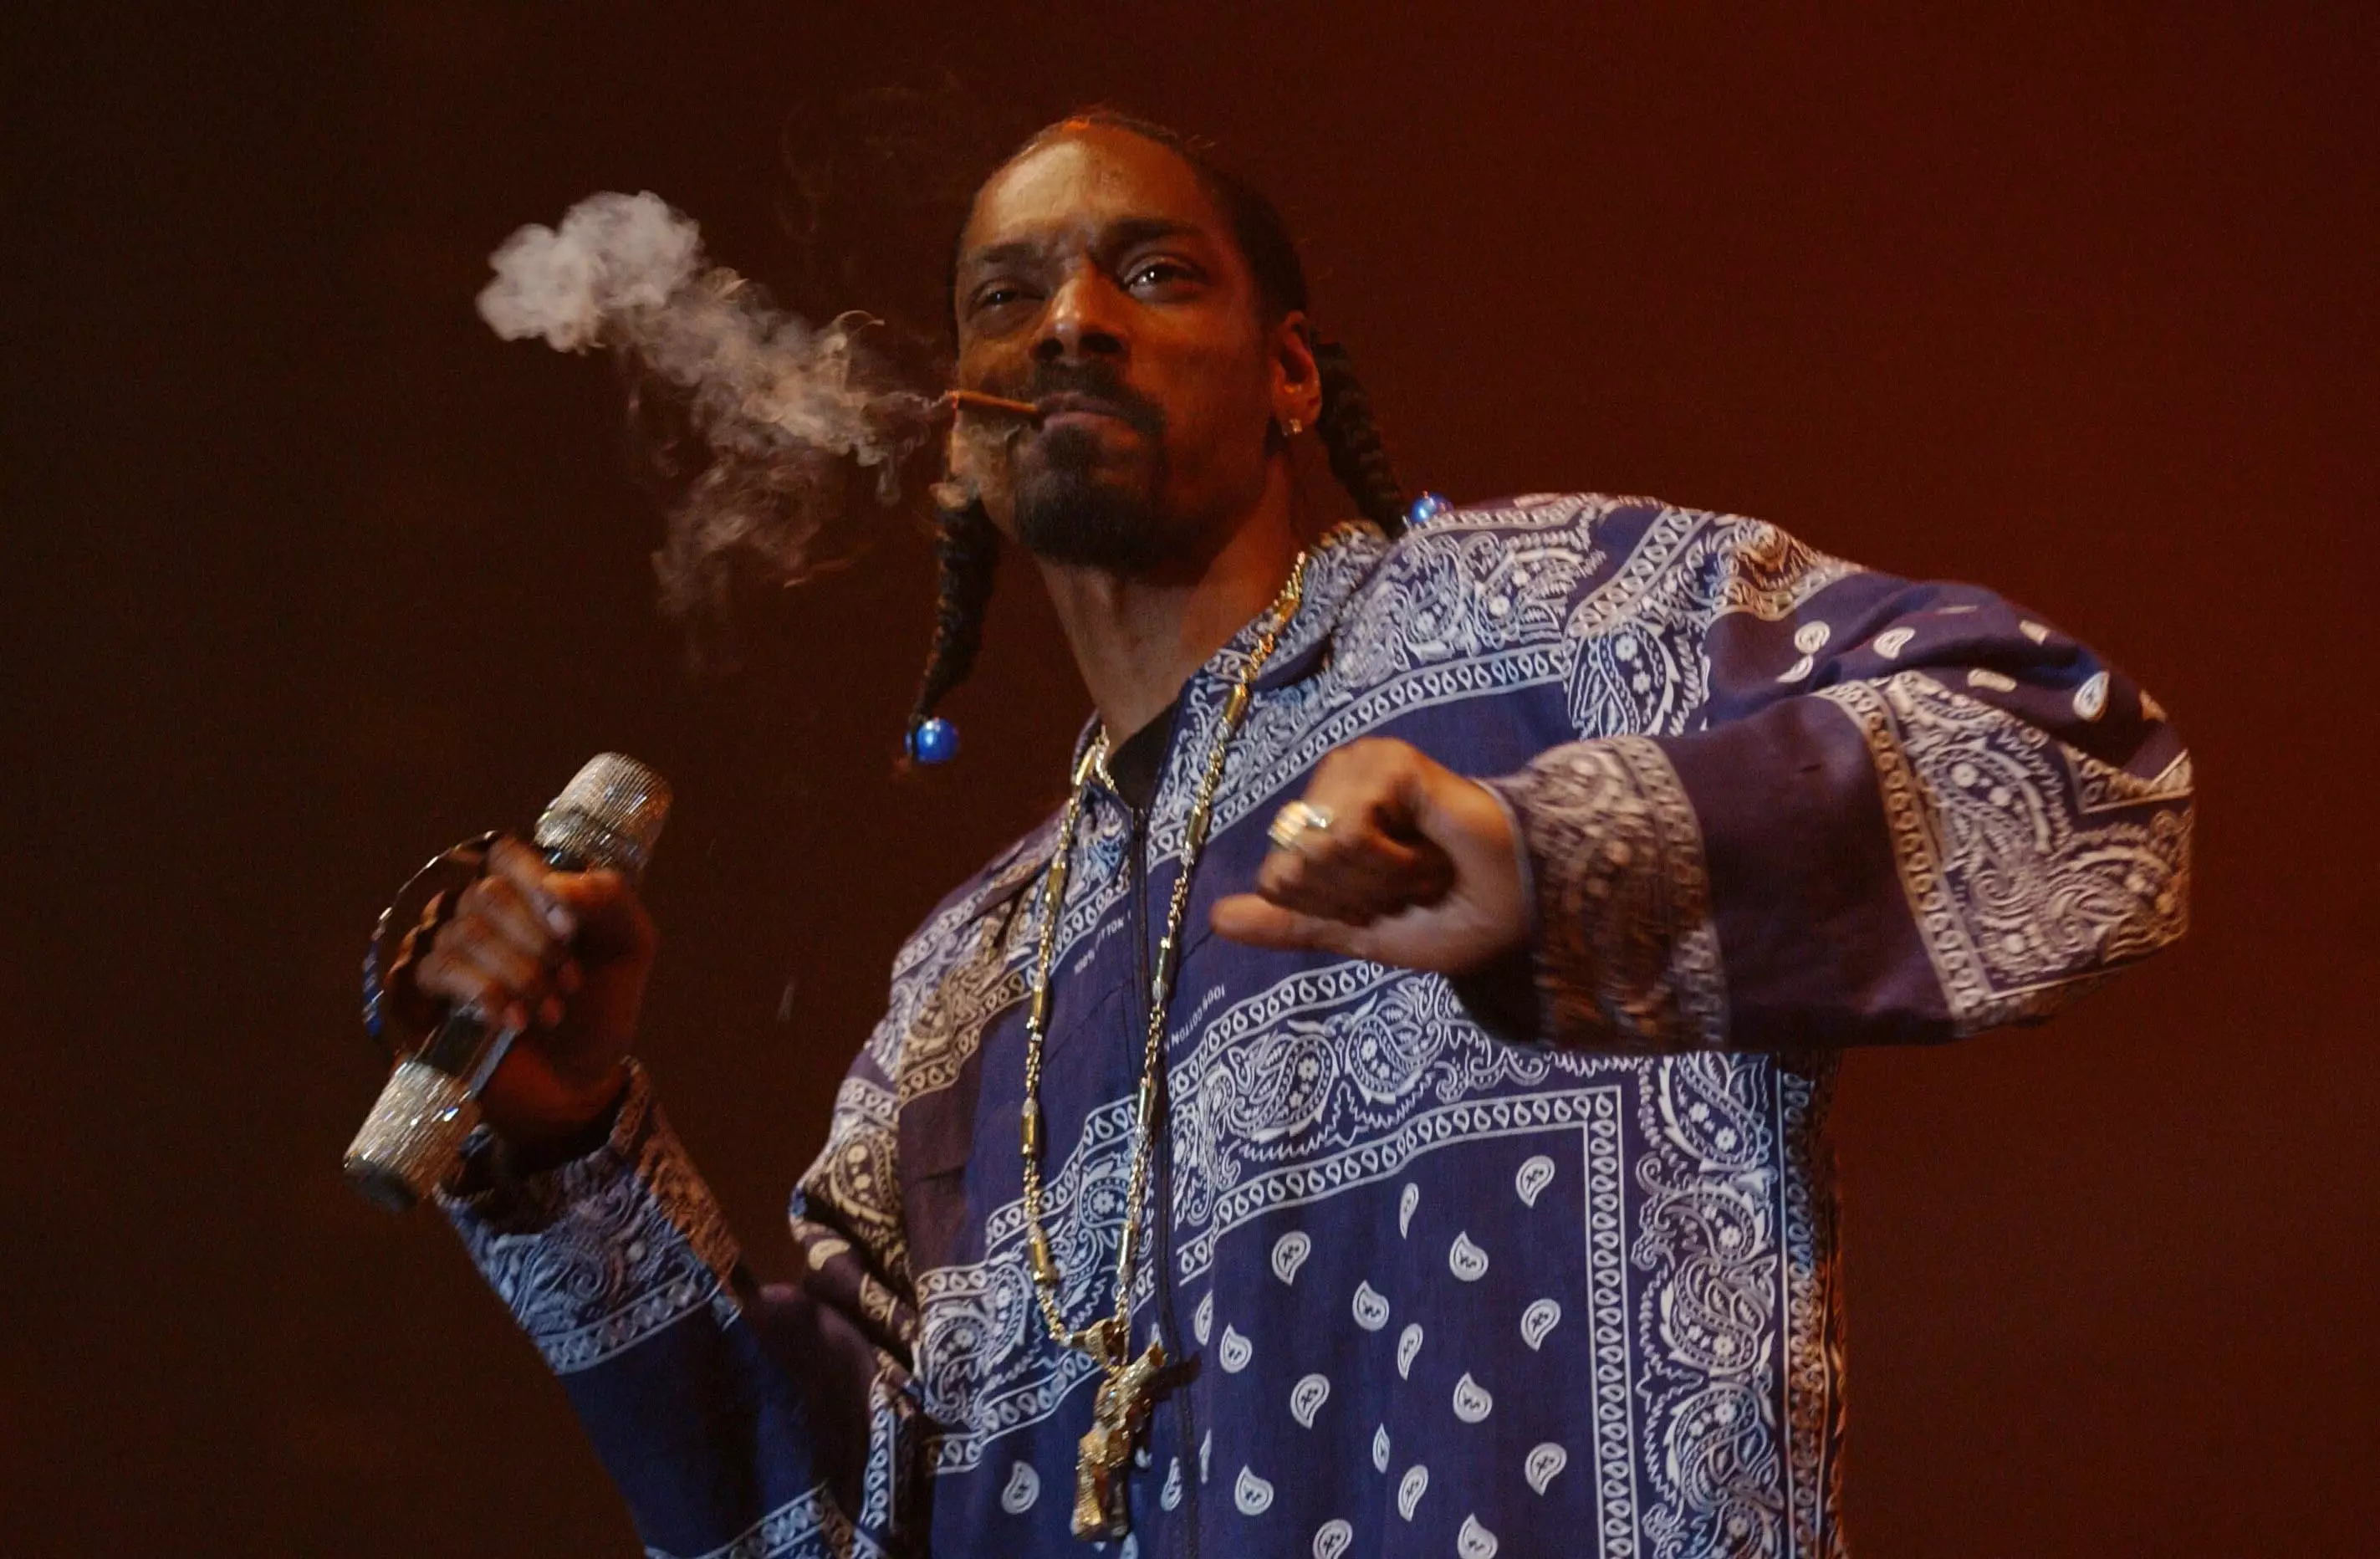 Snoop would make the legalisation of weed his top priority as US President.